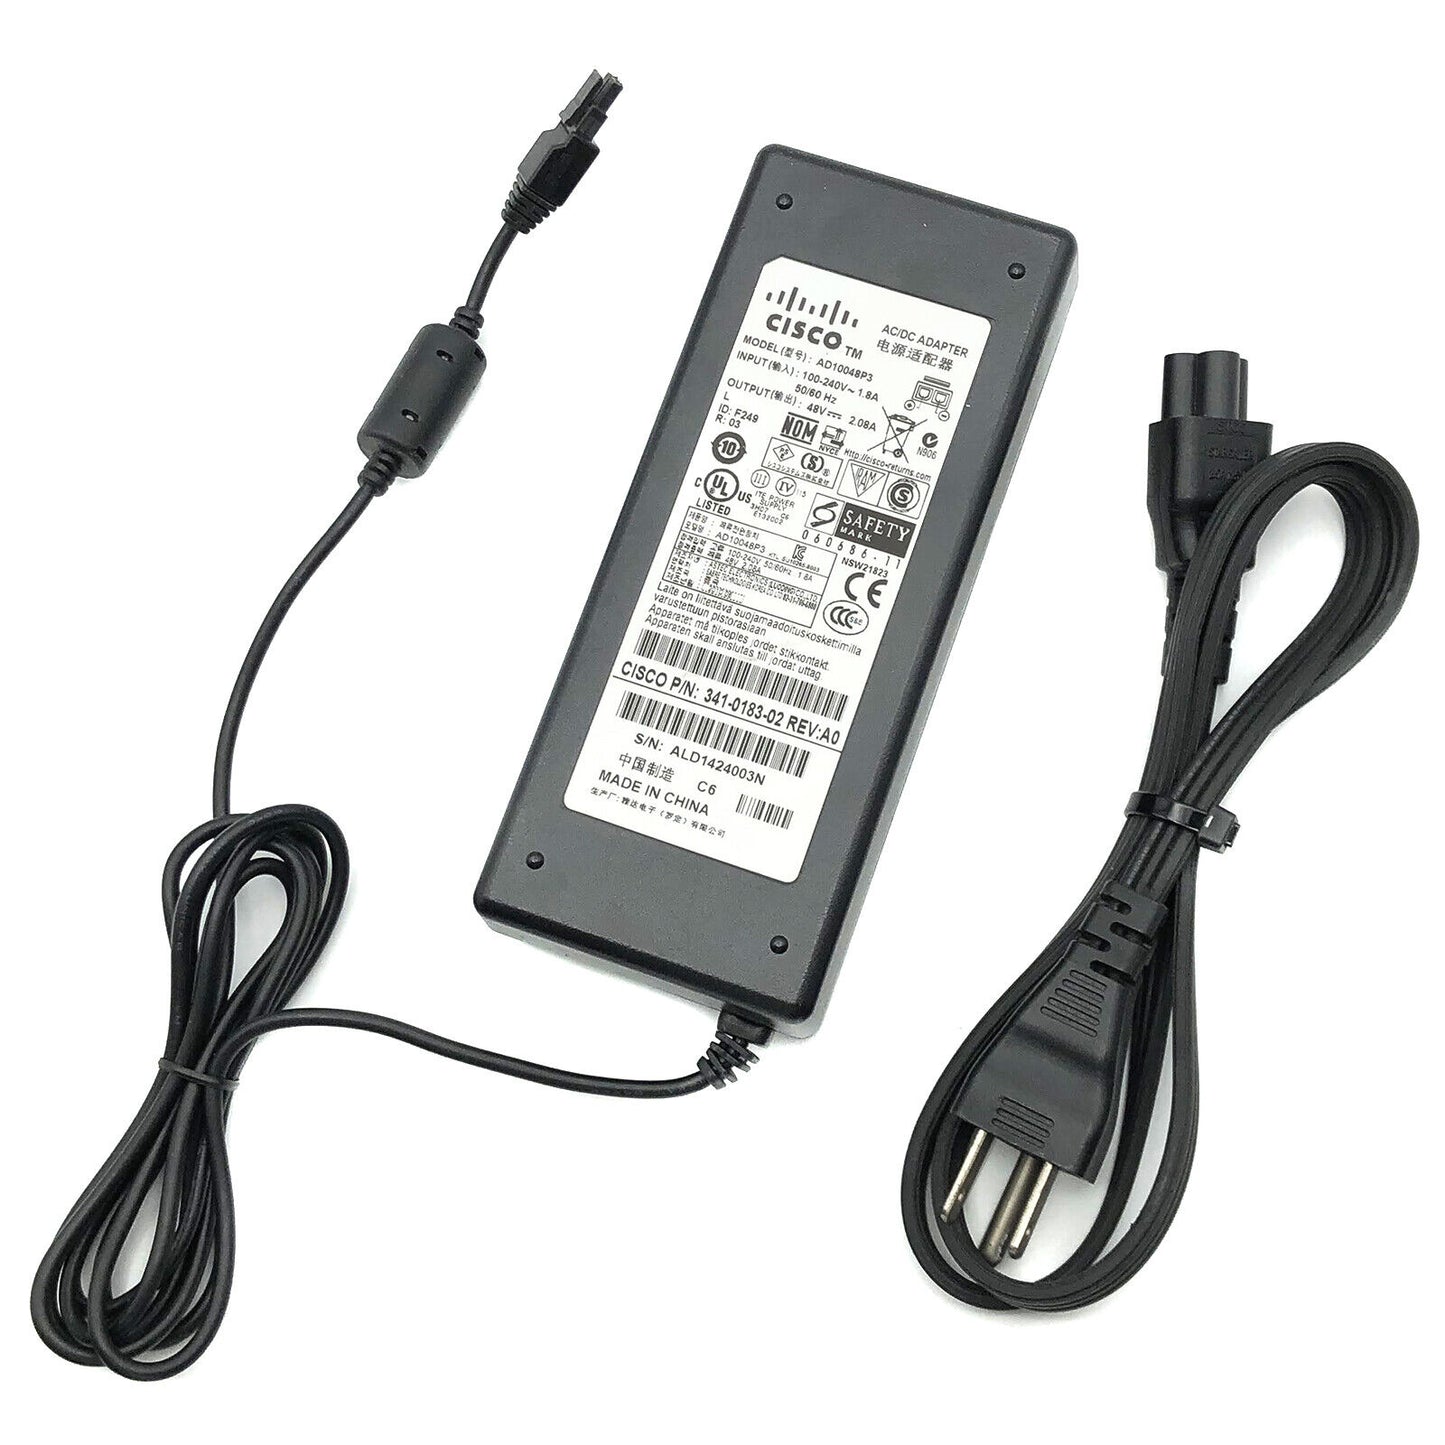 OEM Cisco ASA5505 48V AC Power Adapter Firewall Router Charger w/ cord